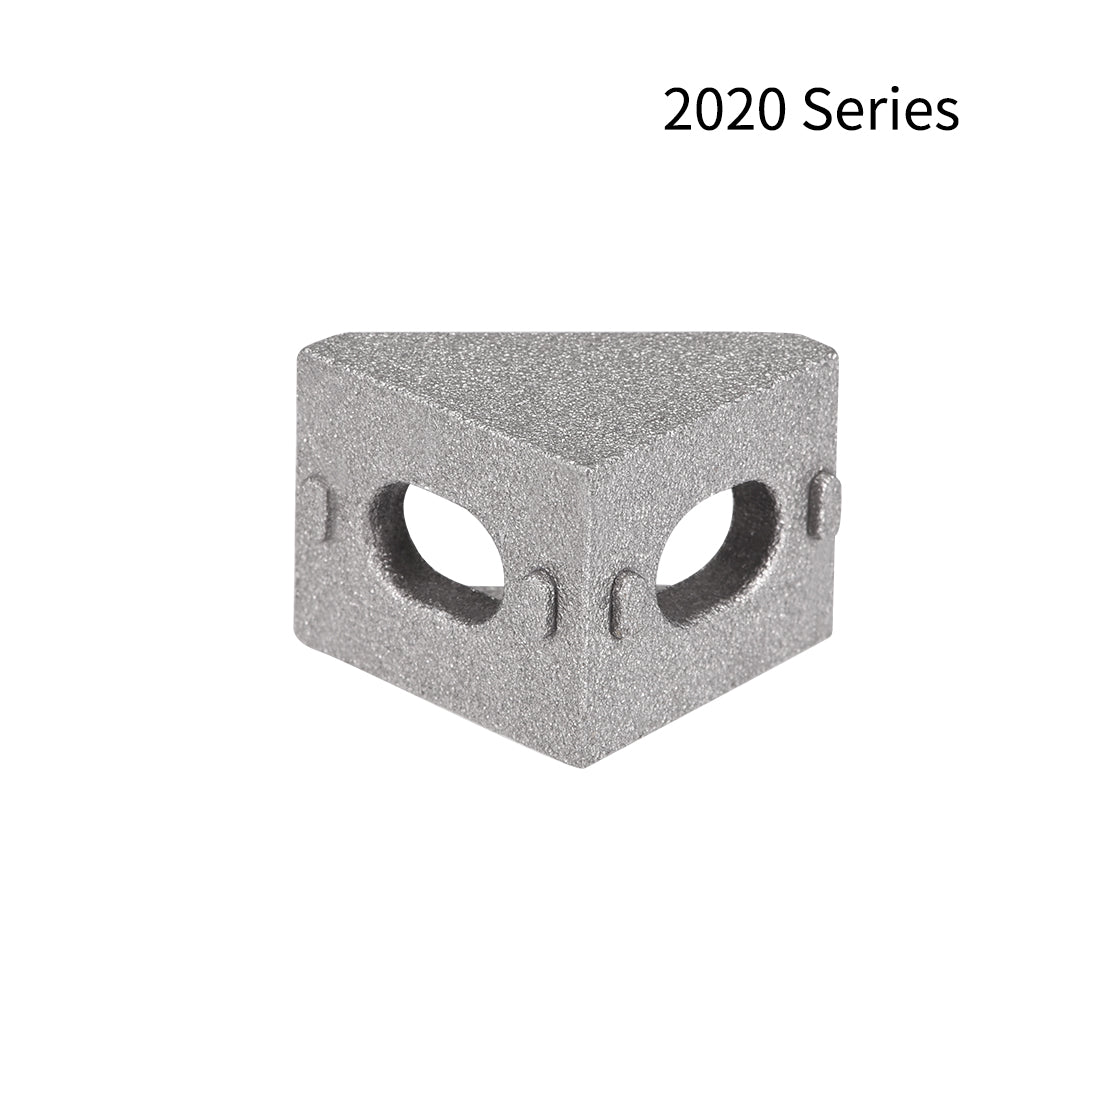 uxcell Uxcell Inside Corner Bracket Gusset, for 2020 Series Aluminum Extrusion Profile with Slot 6mm, 25 Pcs (Silver)